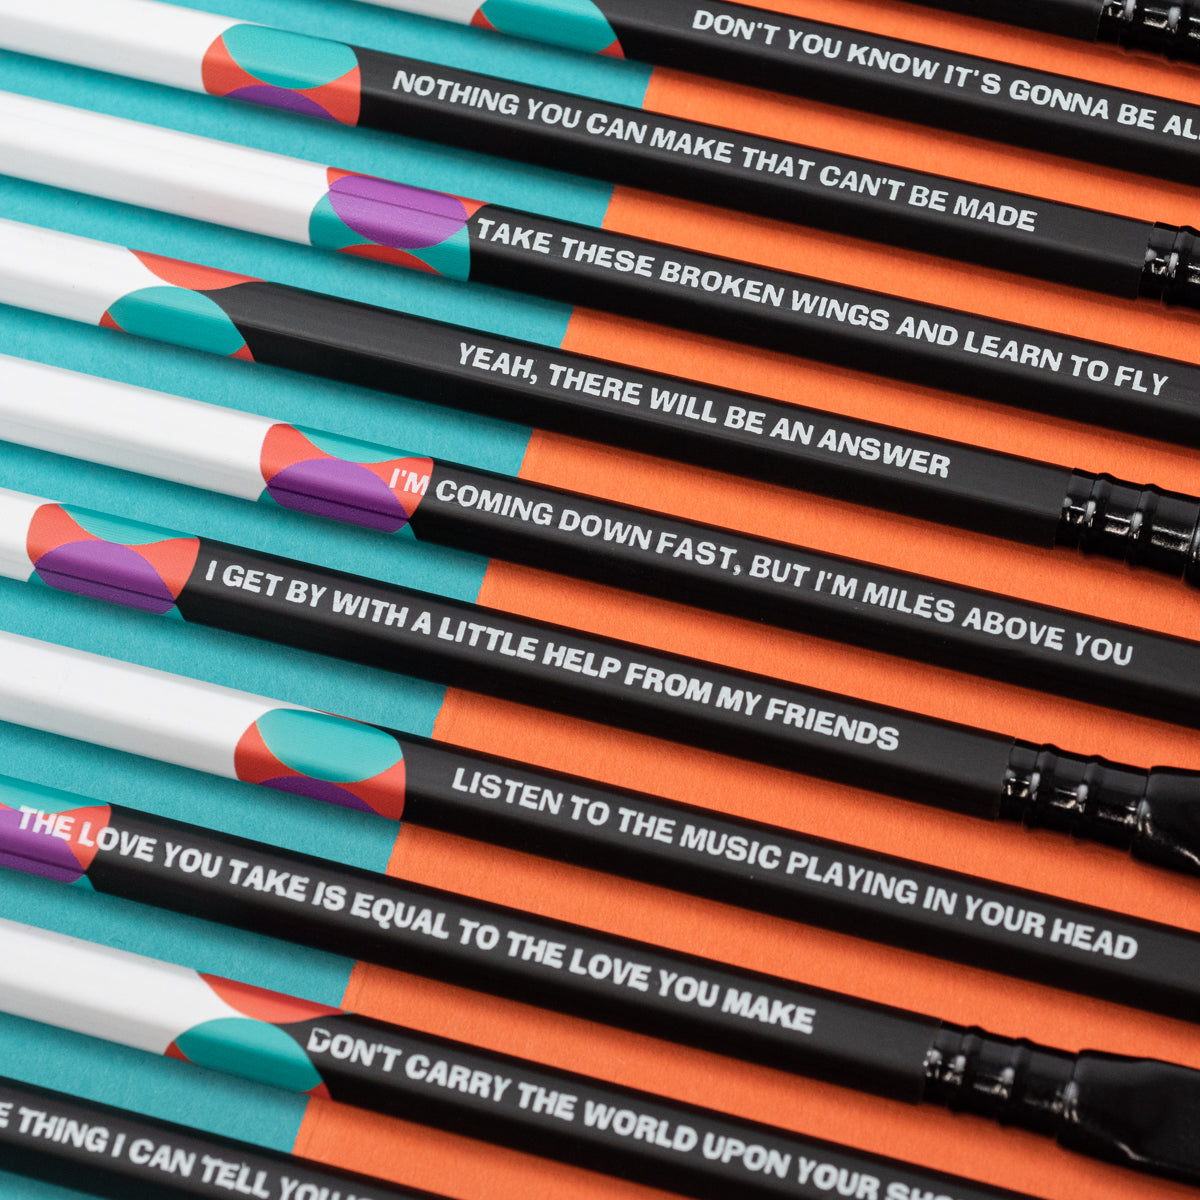 A Blackwing Volume 192 (Set of 12) with a quote from Lennon.